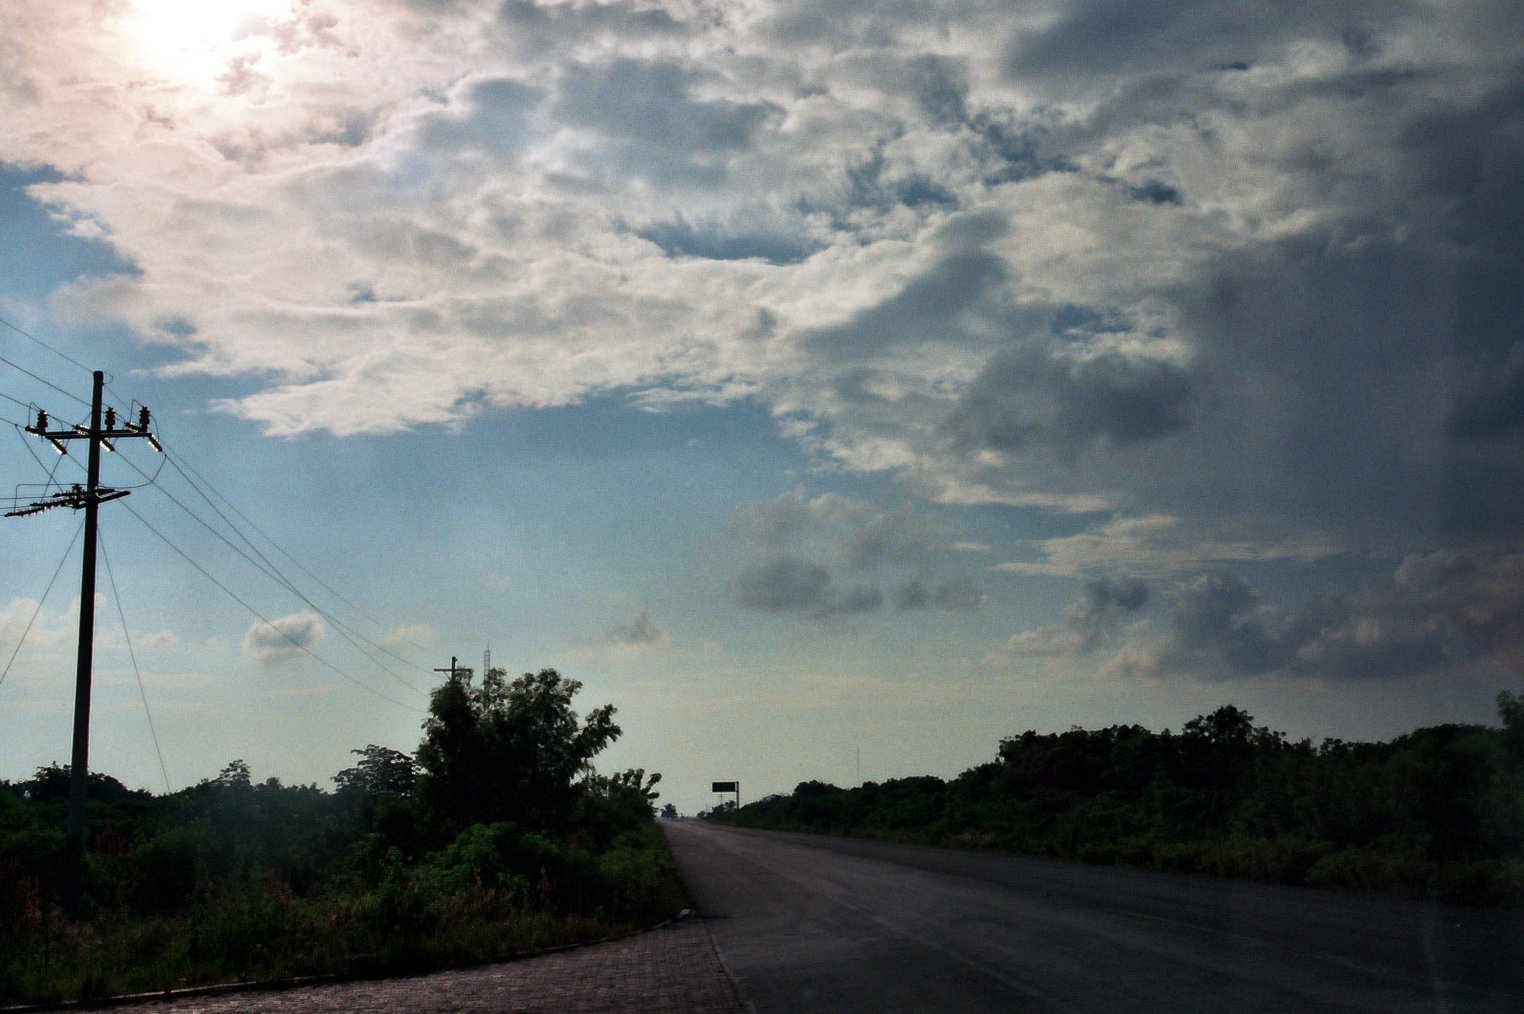 a sky filled with clouds over a rural road